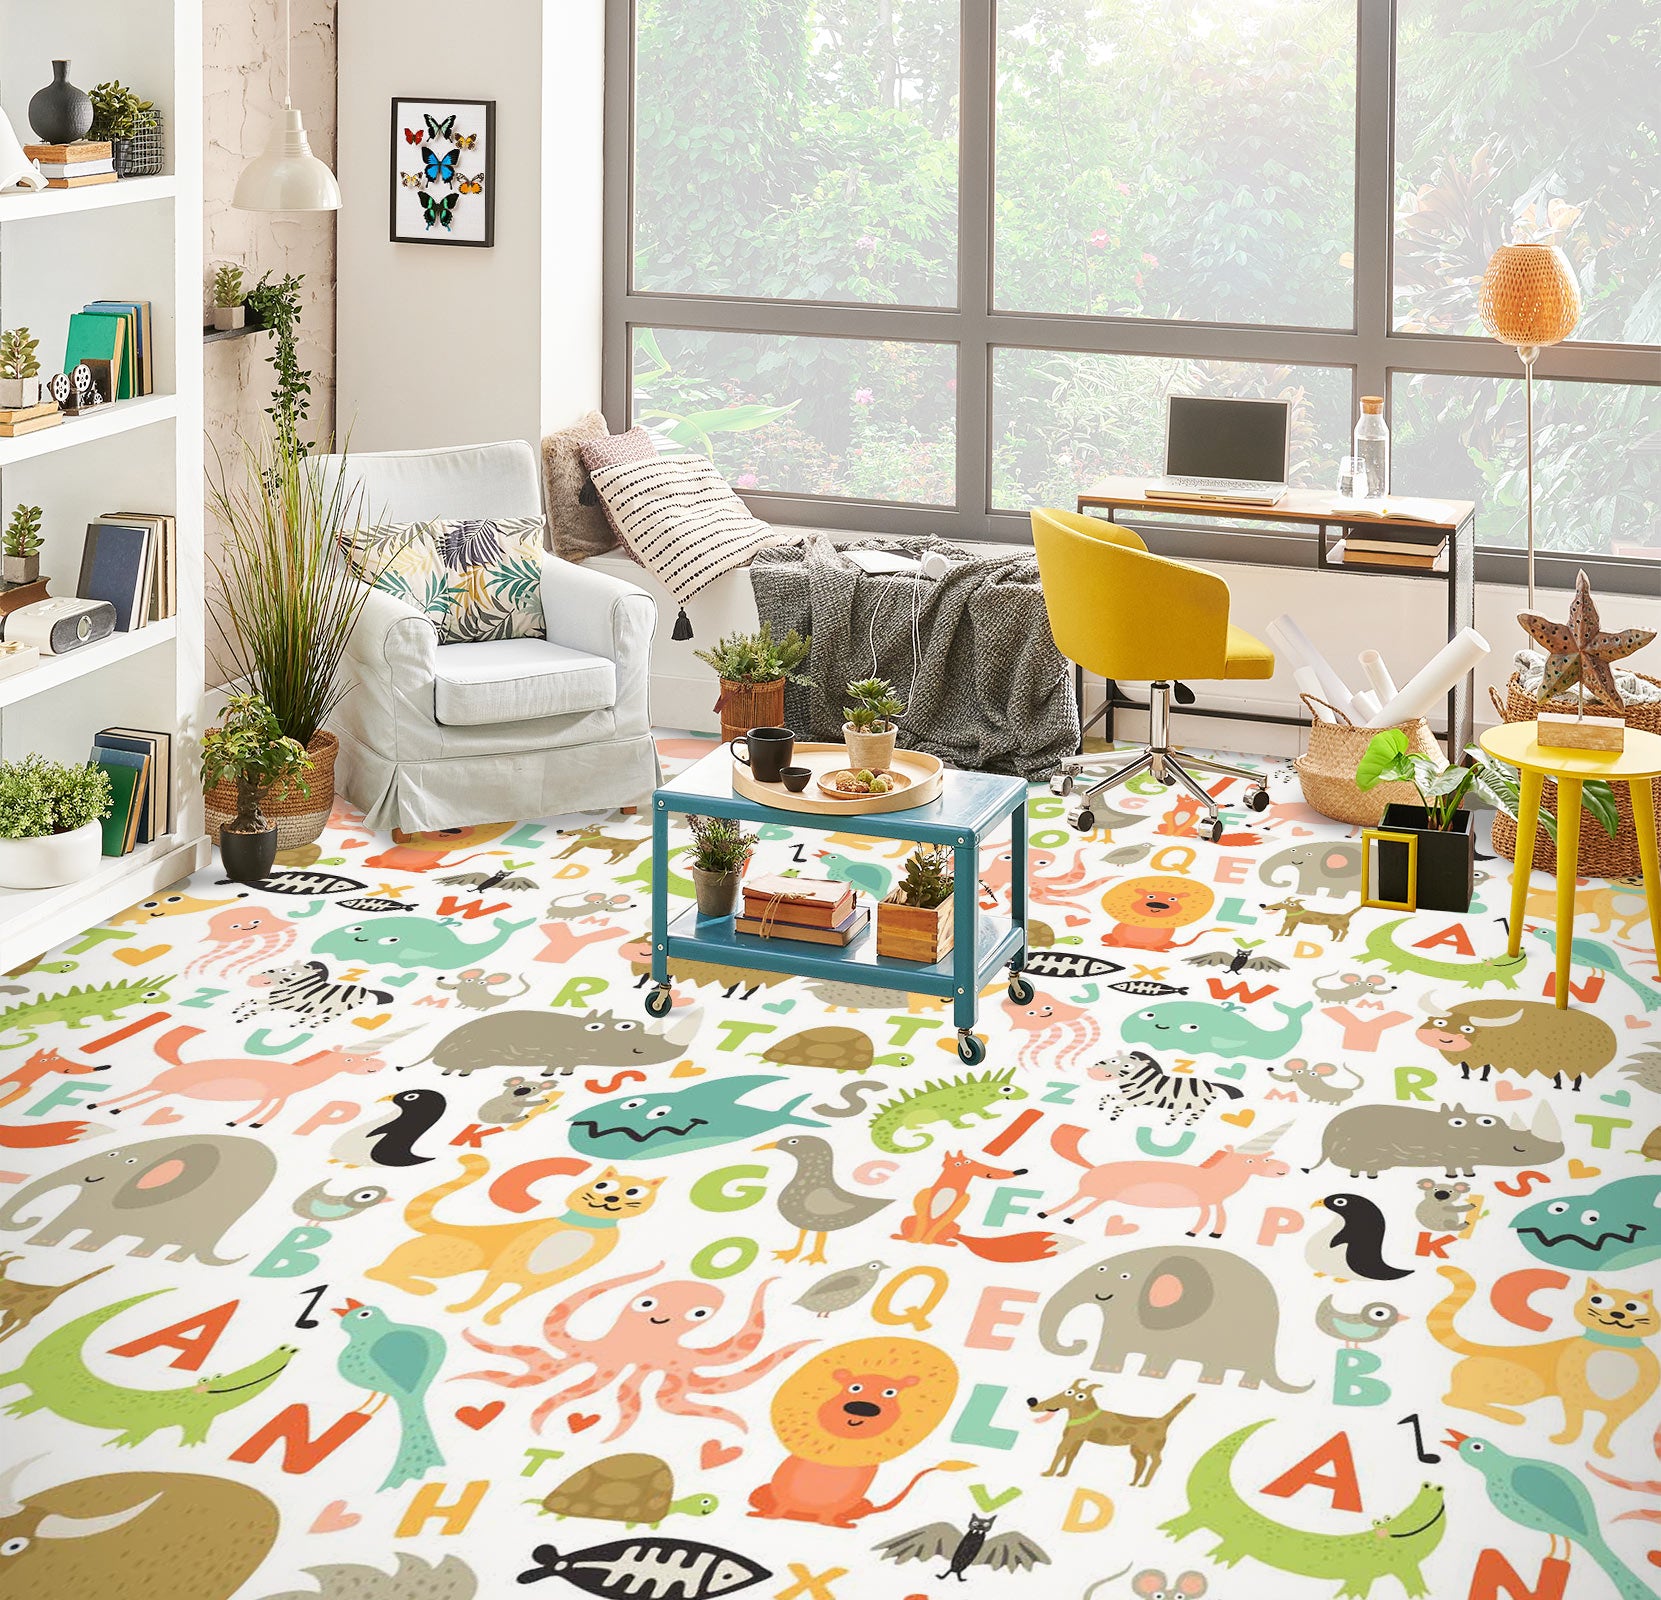 3D Letters And Animals 1152 Floor Mural  Wallpaper Murals Self-Adhesive Removable Print Epoxy